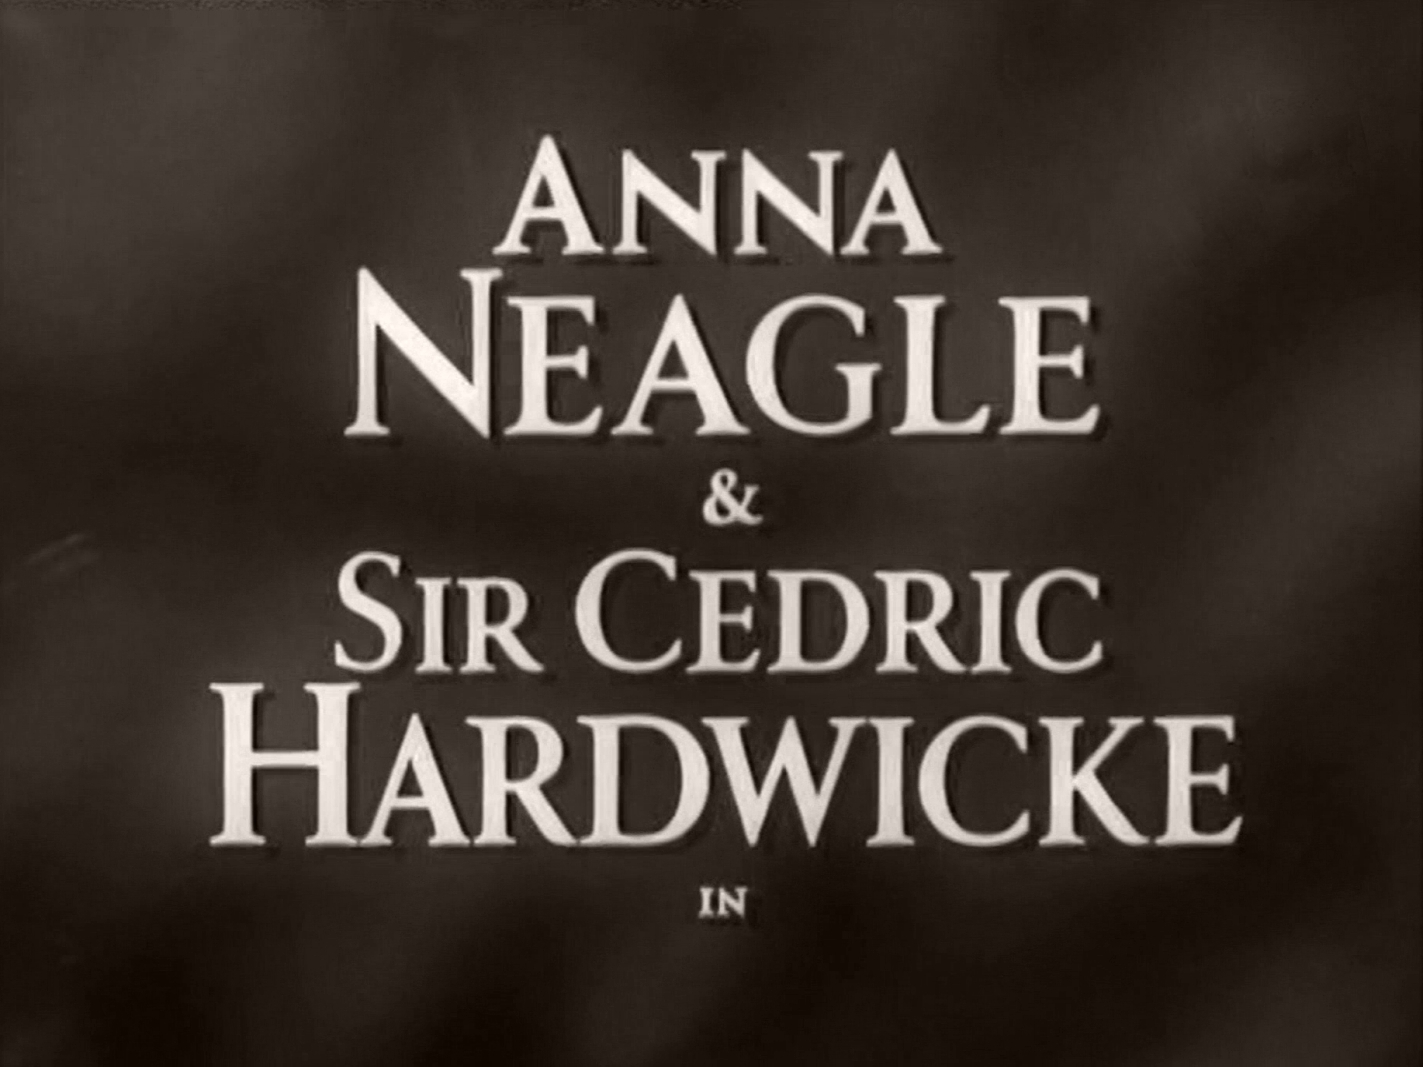 Main title from Peg of Old Drury (1935) (1).  Anna Neagle and Sir Cedric Hardwicke in